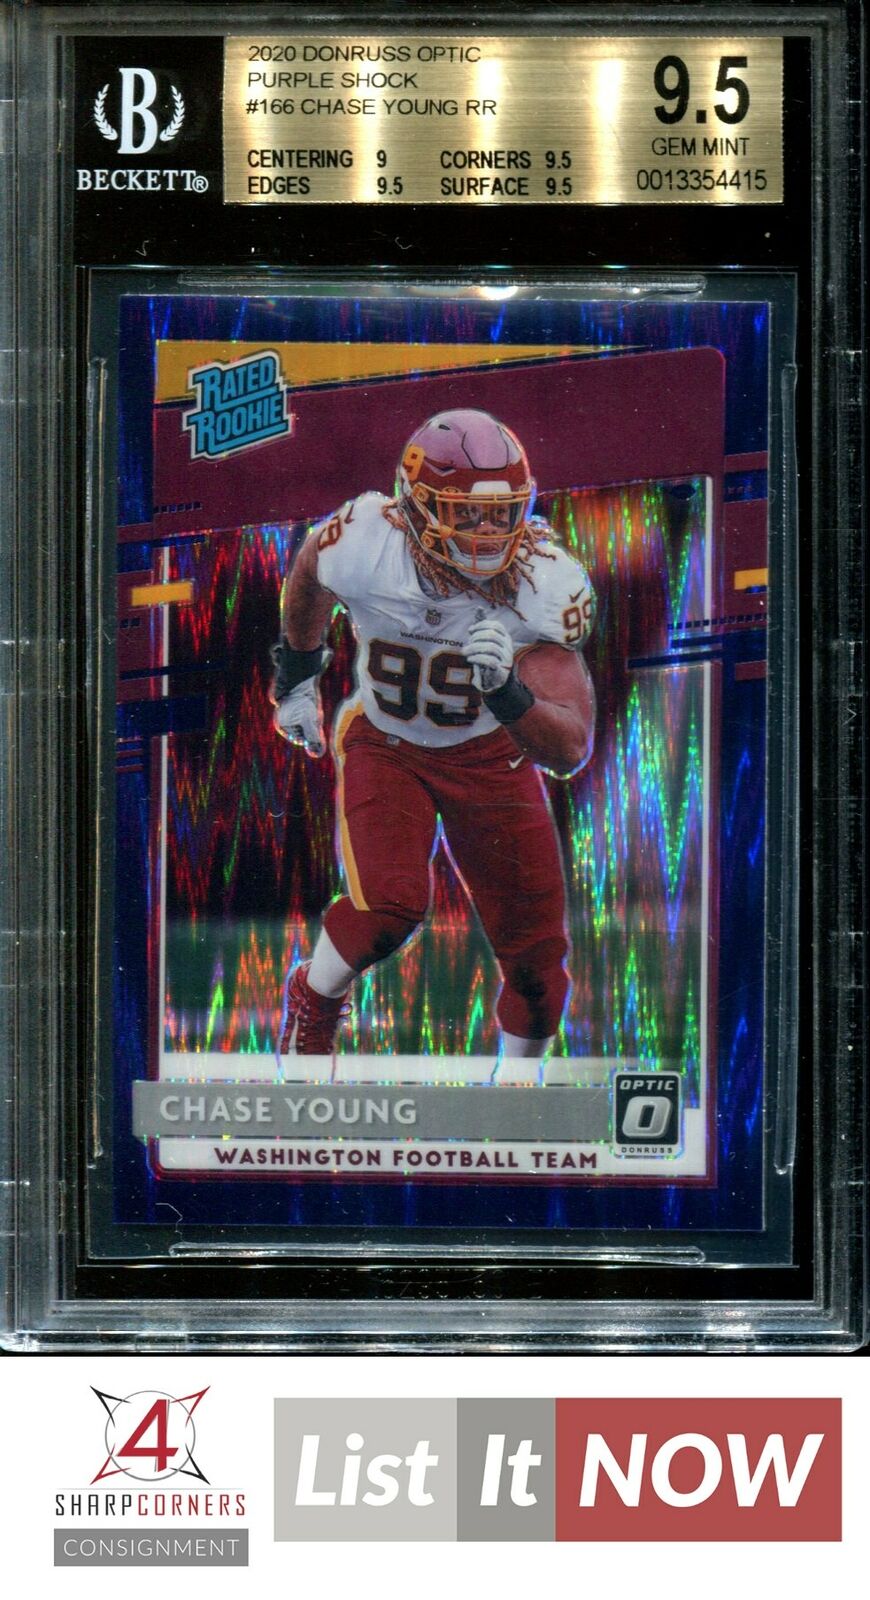 2020 DONRUSS OPTIC PURPLE SHOCK #166 CHASE YOUNG RC BGS 9.5 A0421-415